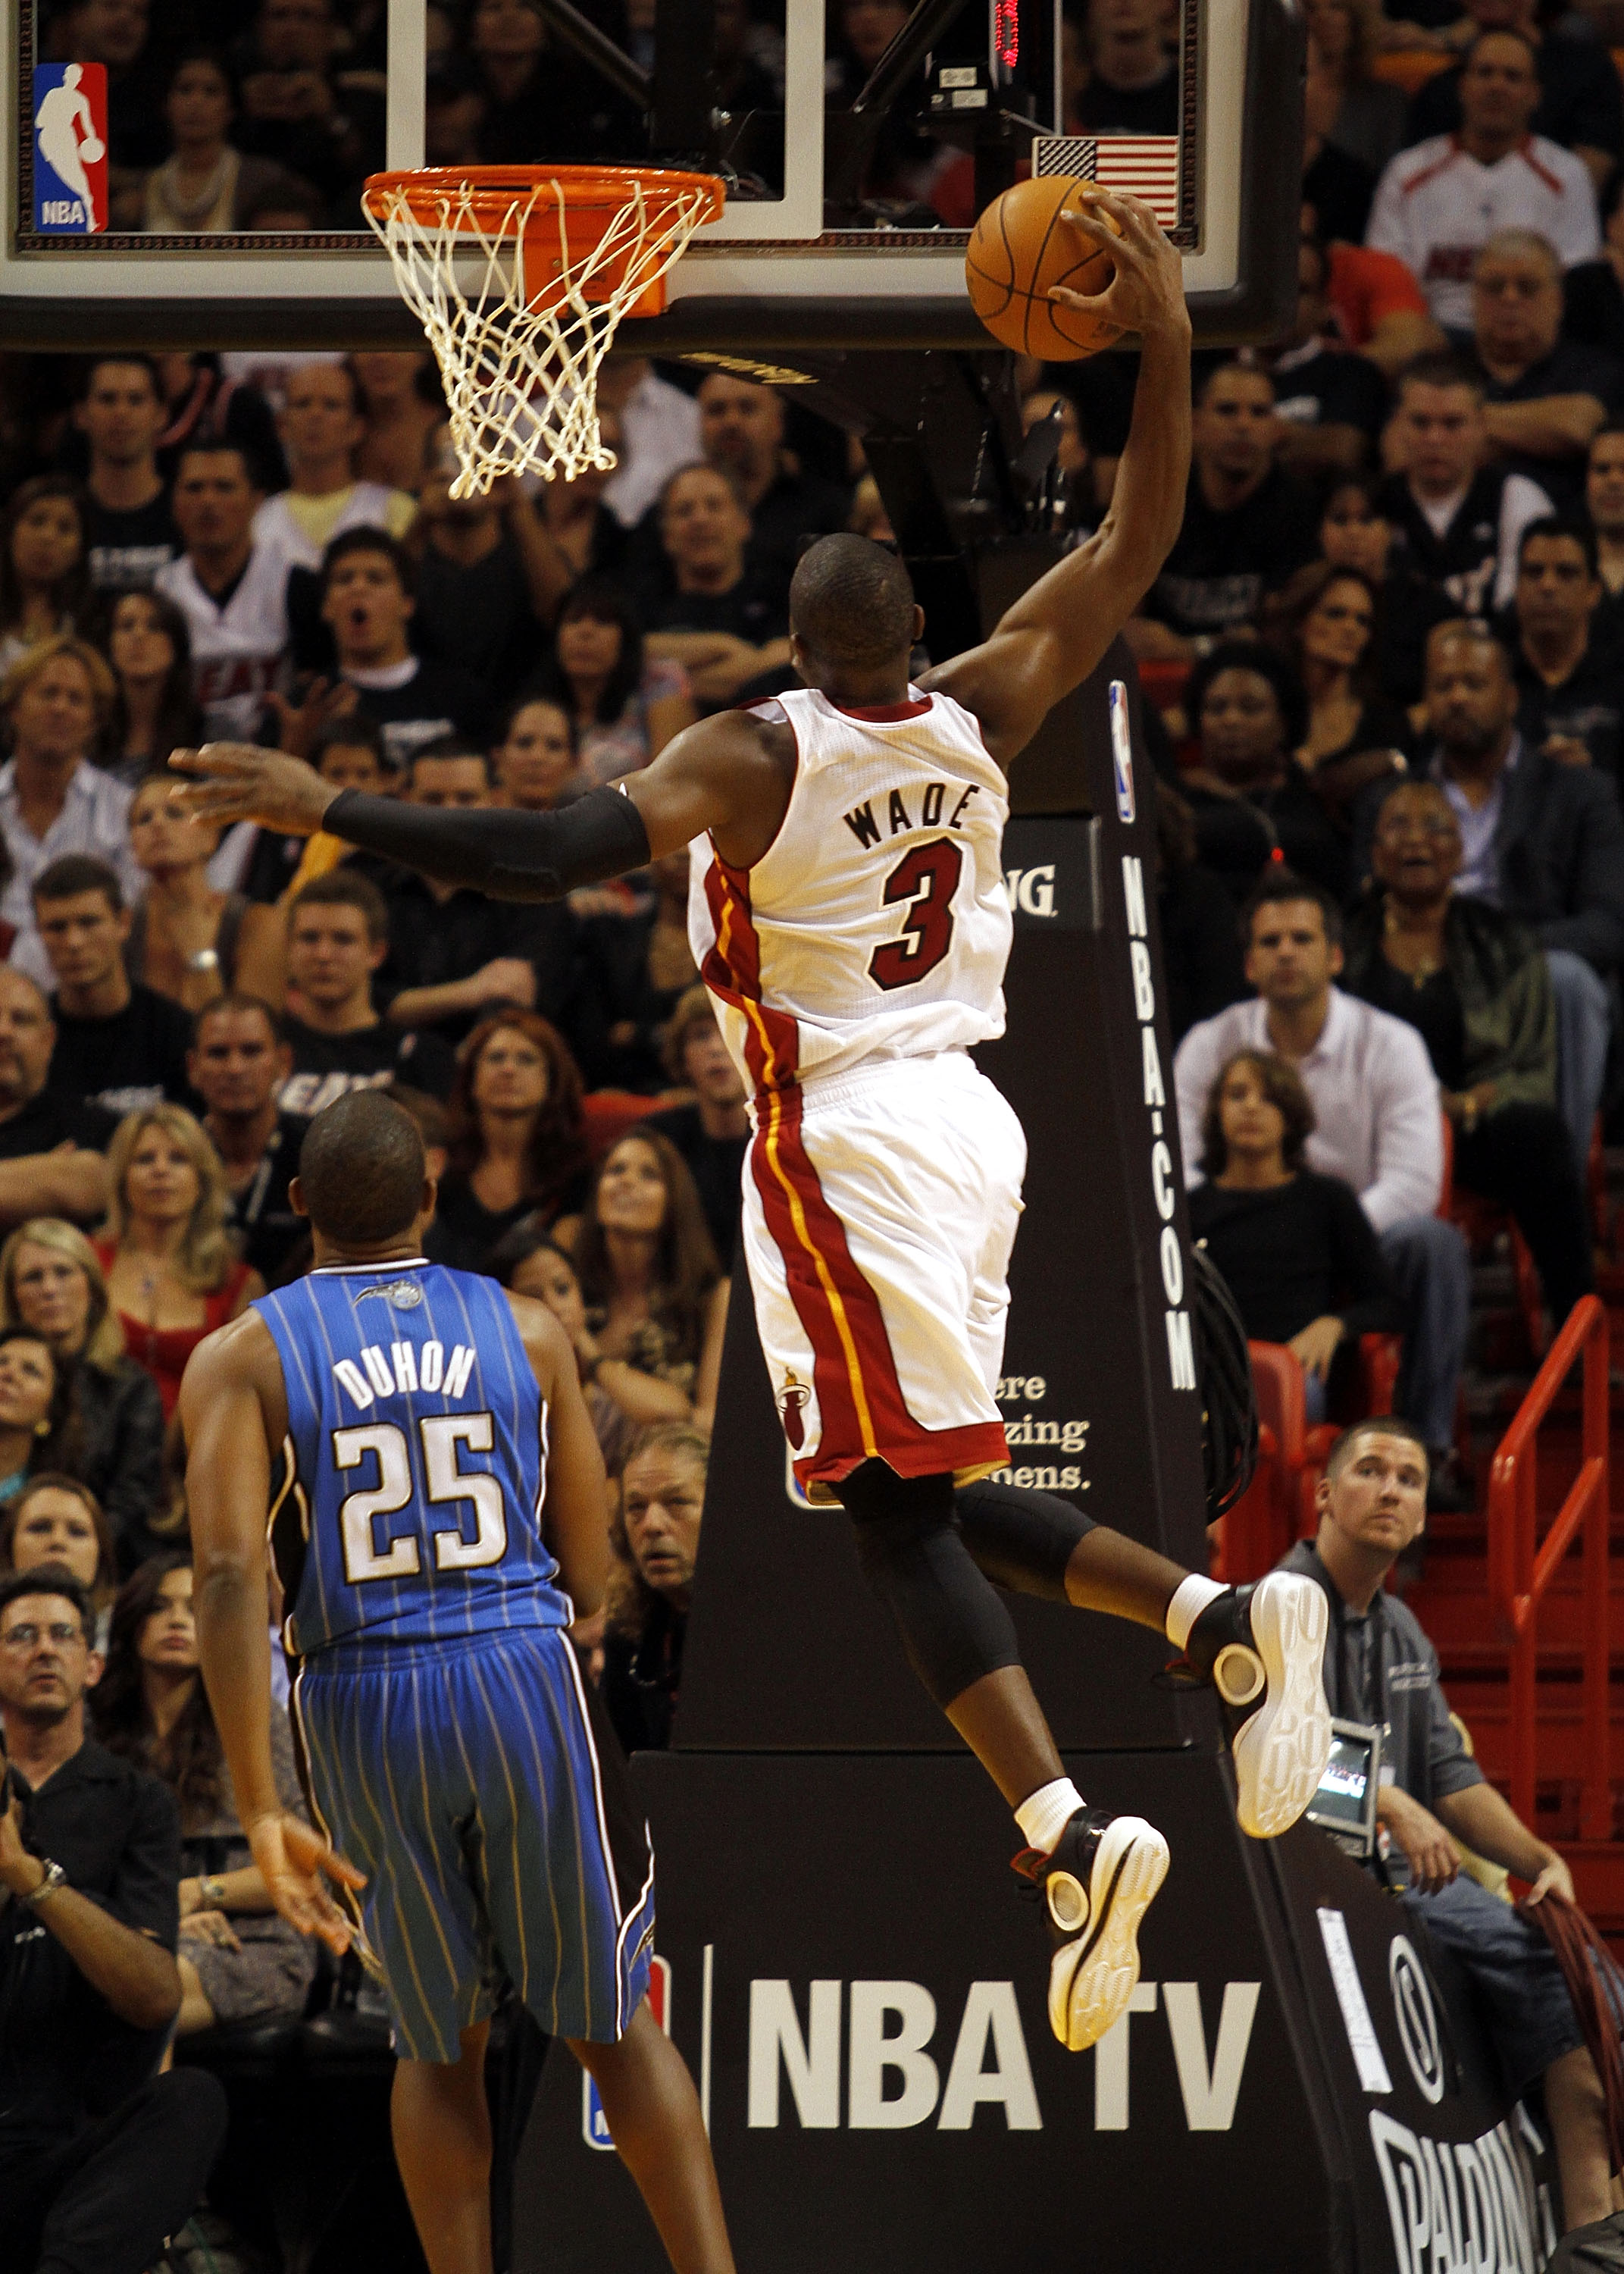 MIAMI - OCTOBER 29:  Guard Dwyane Wade #3 of  the Miami Heat dunks  against the Orlando Magic at American Airlines Arena on October 29, 2010 in Miami, Florida.  NOTE TO USER: User expressly acknowledges and agrees that, by downloading and or using this ph